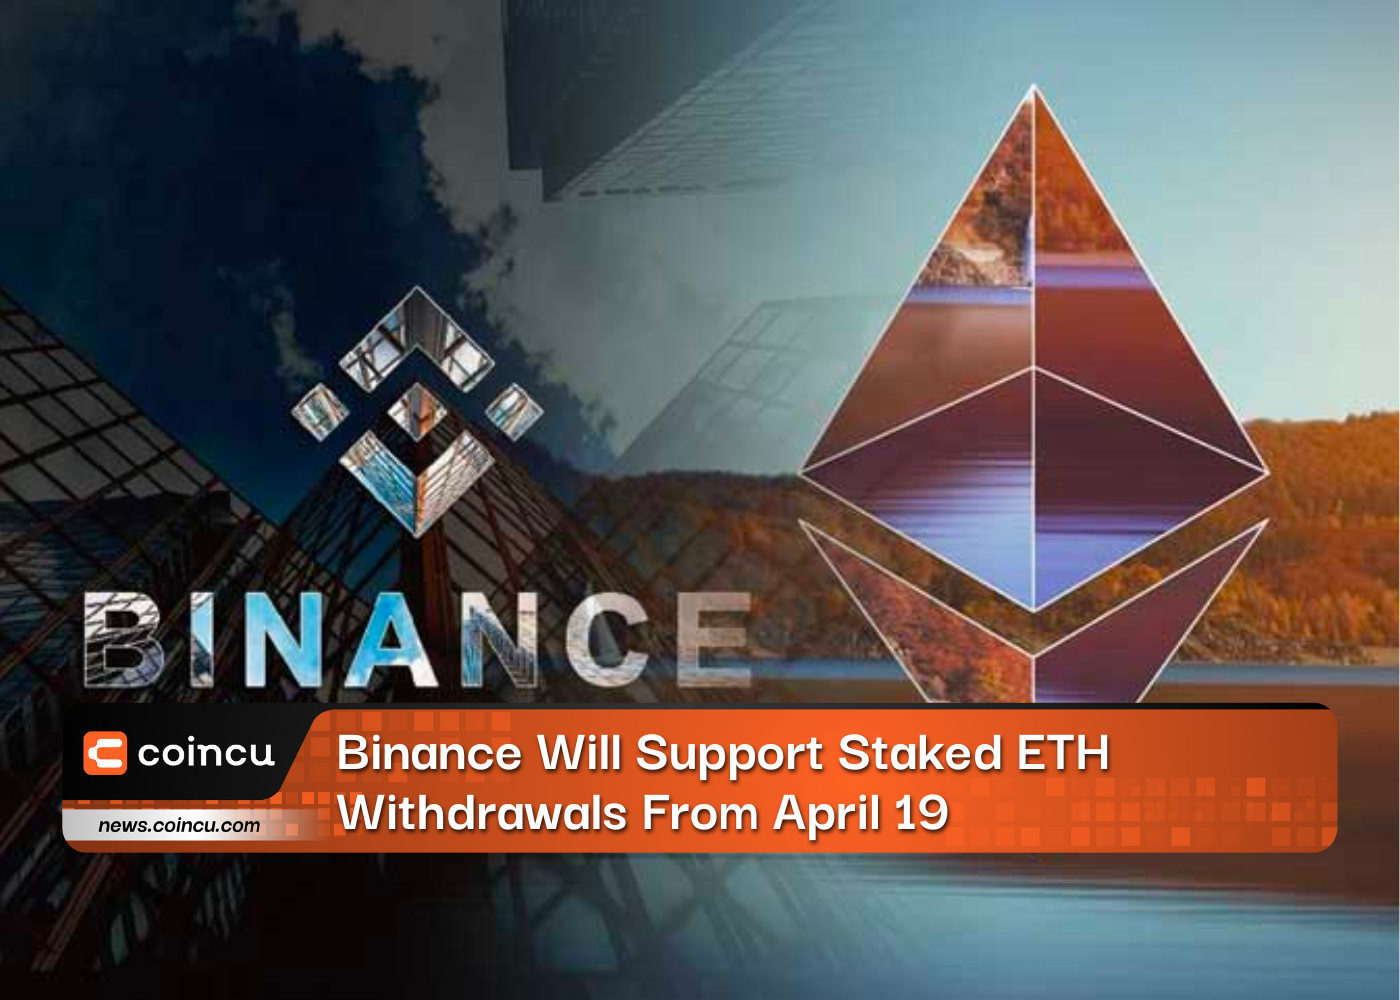 Binance Will Support Staked ETH Withdrawals From April 19